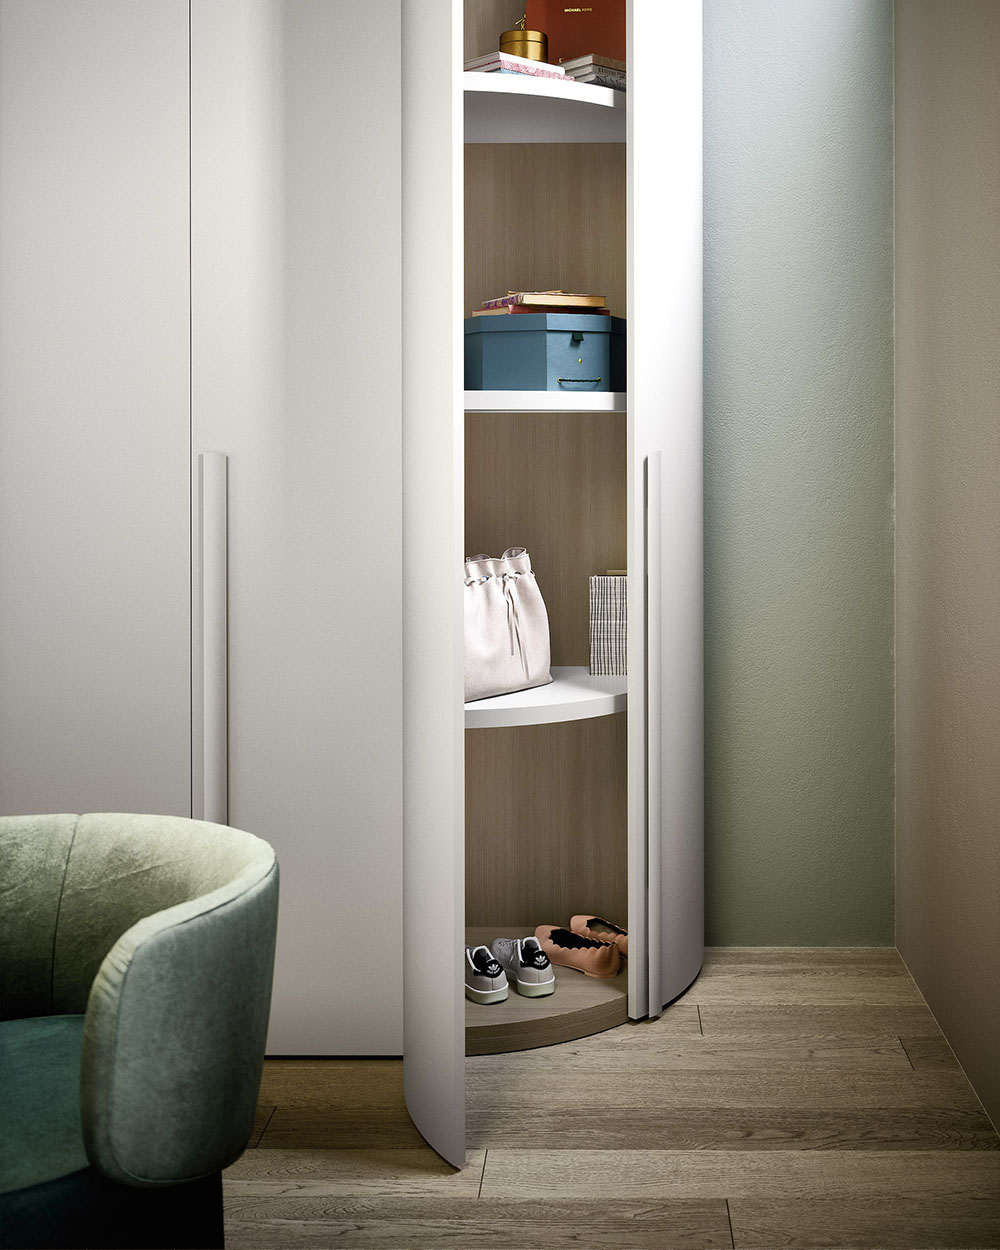 Luxury Italian curved wardrobe design. Designed for your home and fitted by Krieder in the UK.